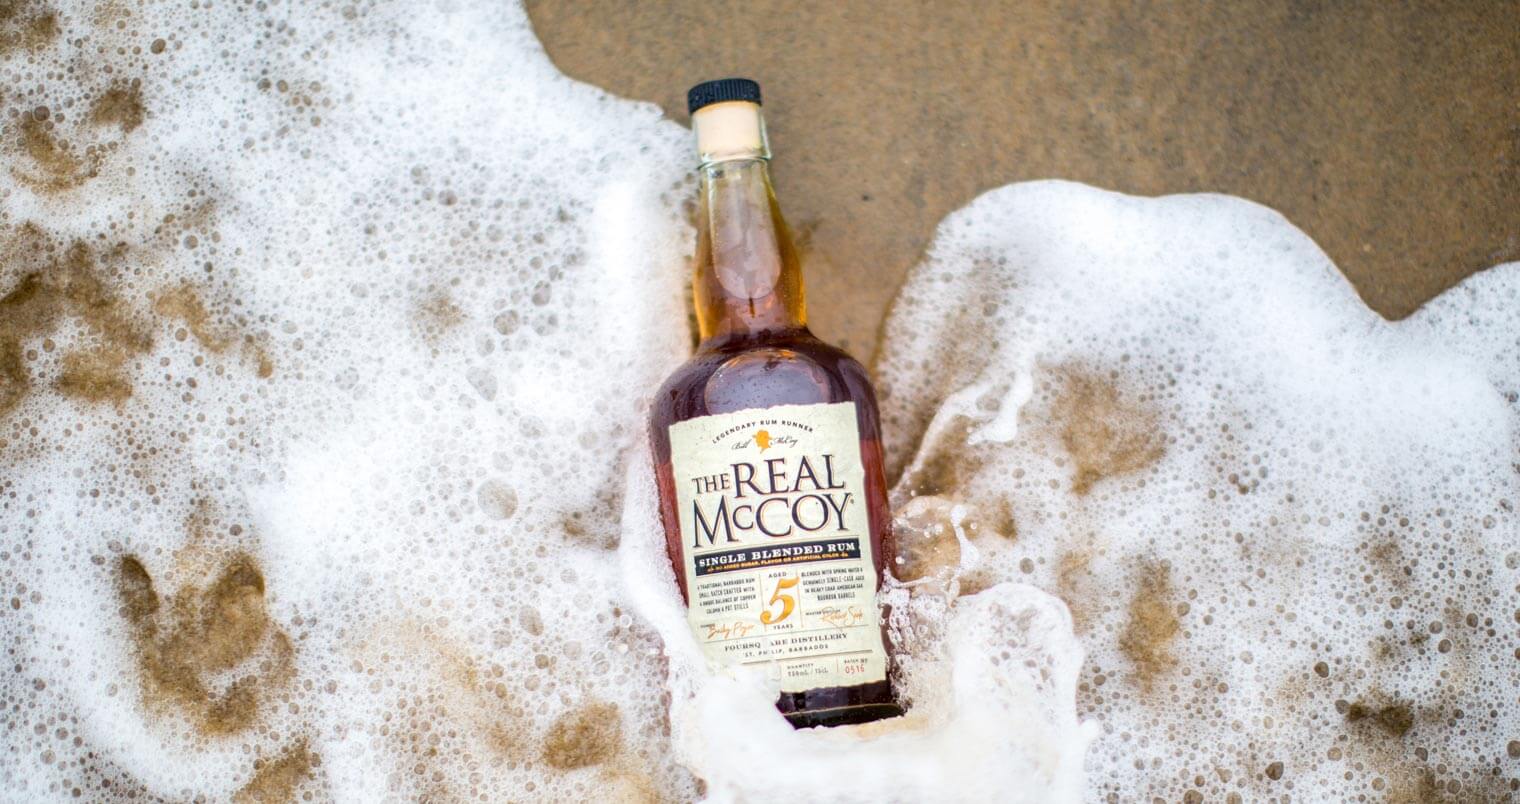 The Real McCoy 12 Year, bottle on shore, featured image